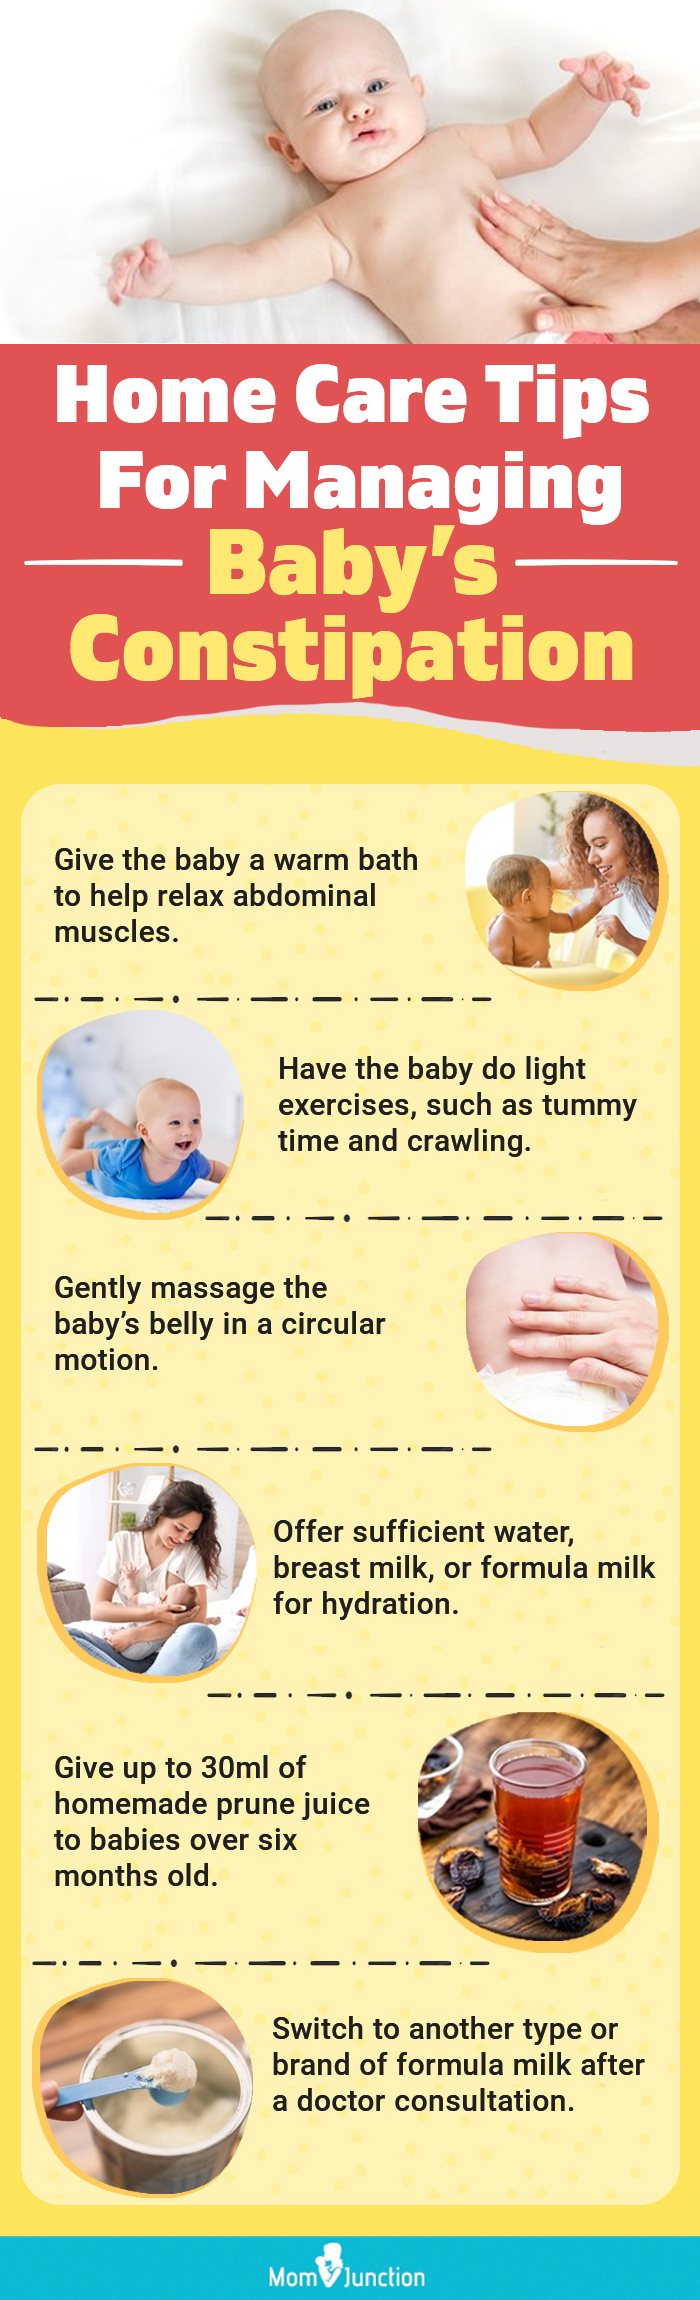 how to make newborn baby poop instantly home remedies